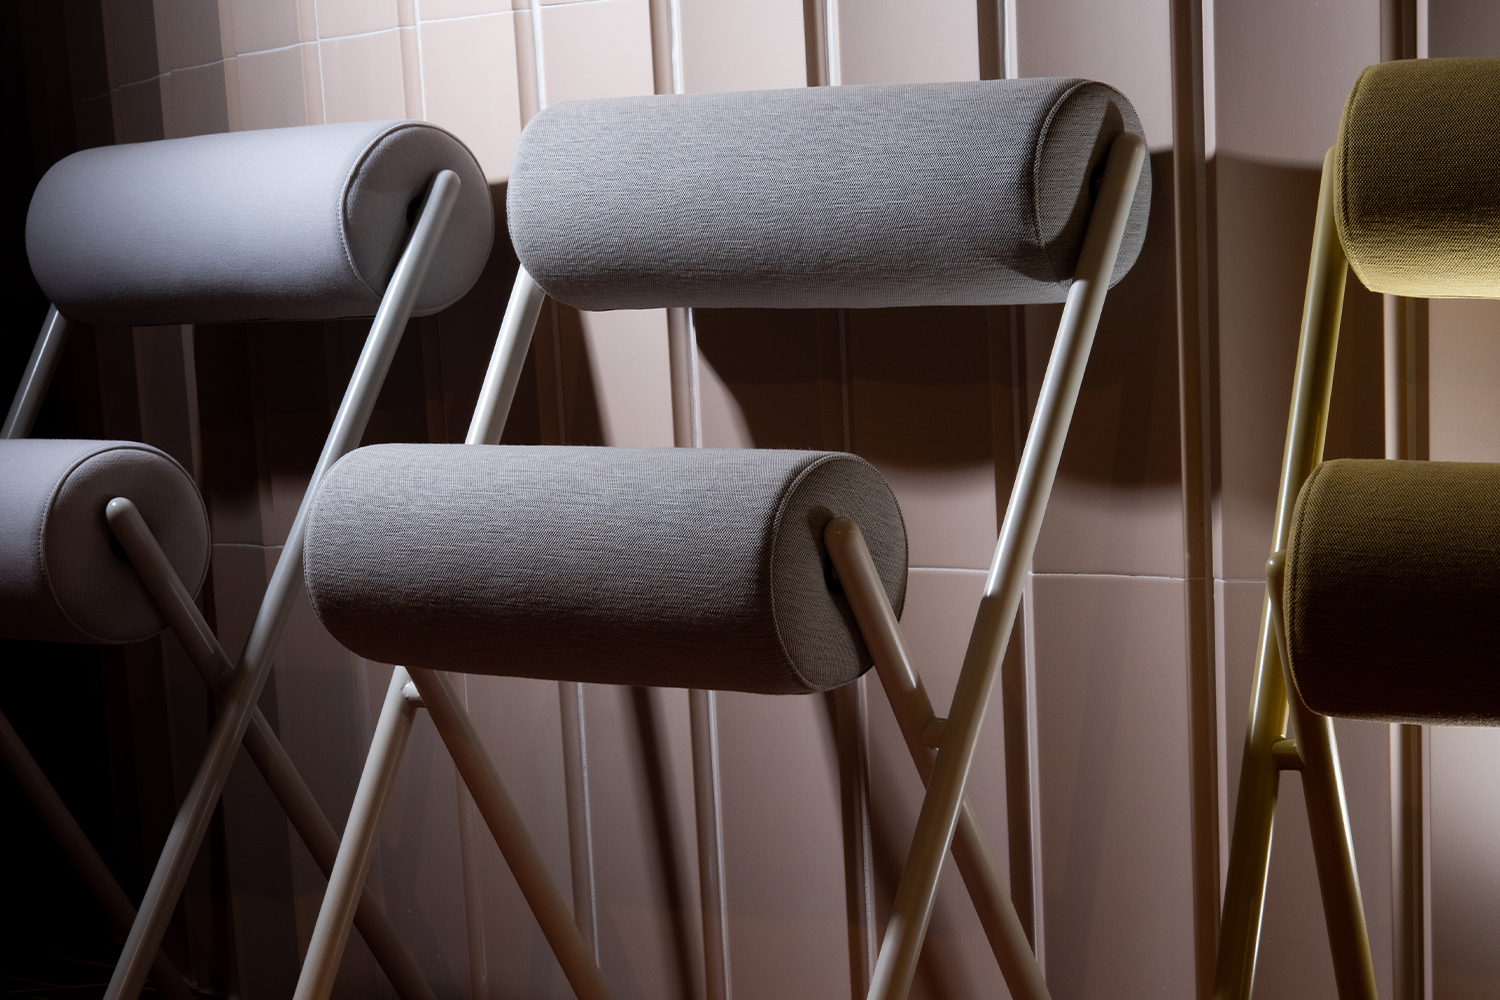 New product: On a Roll with Sancal